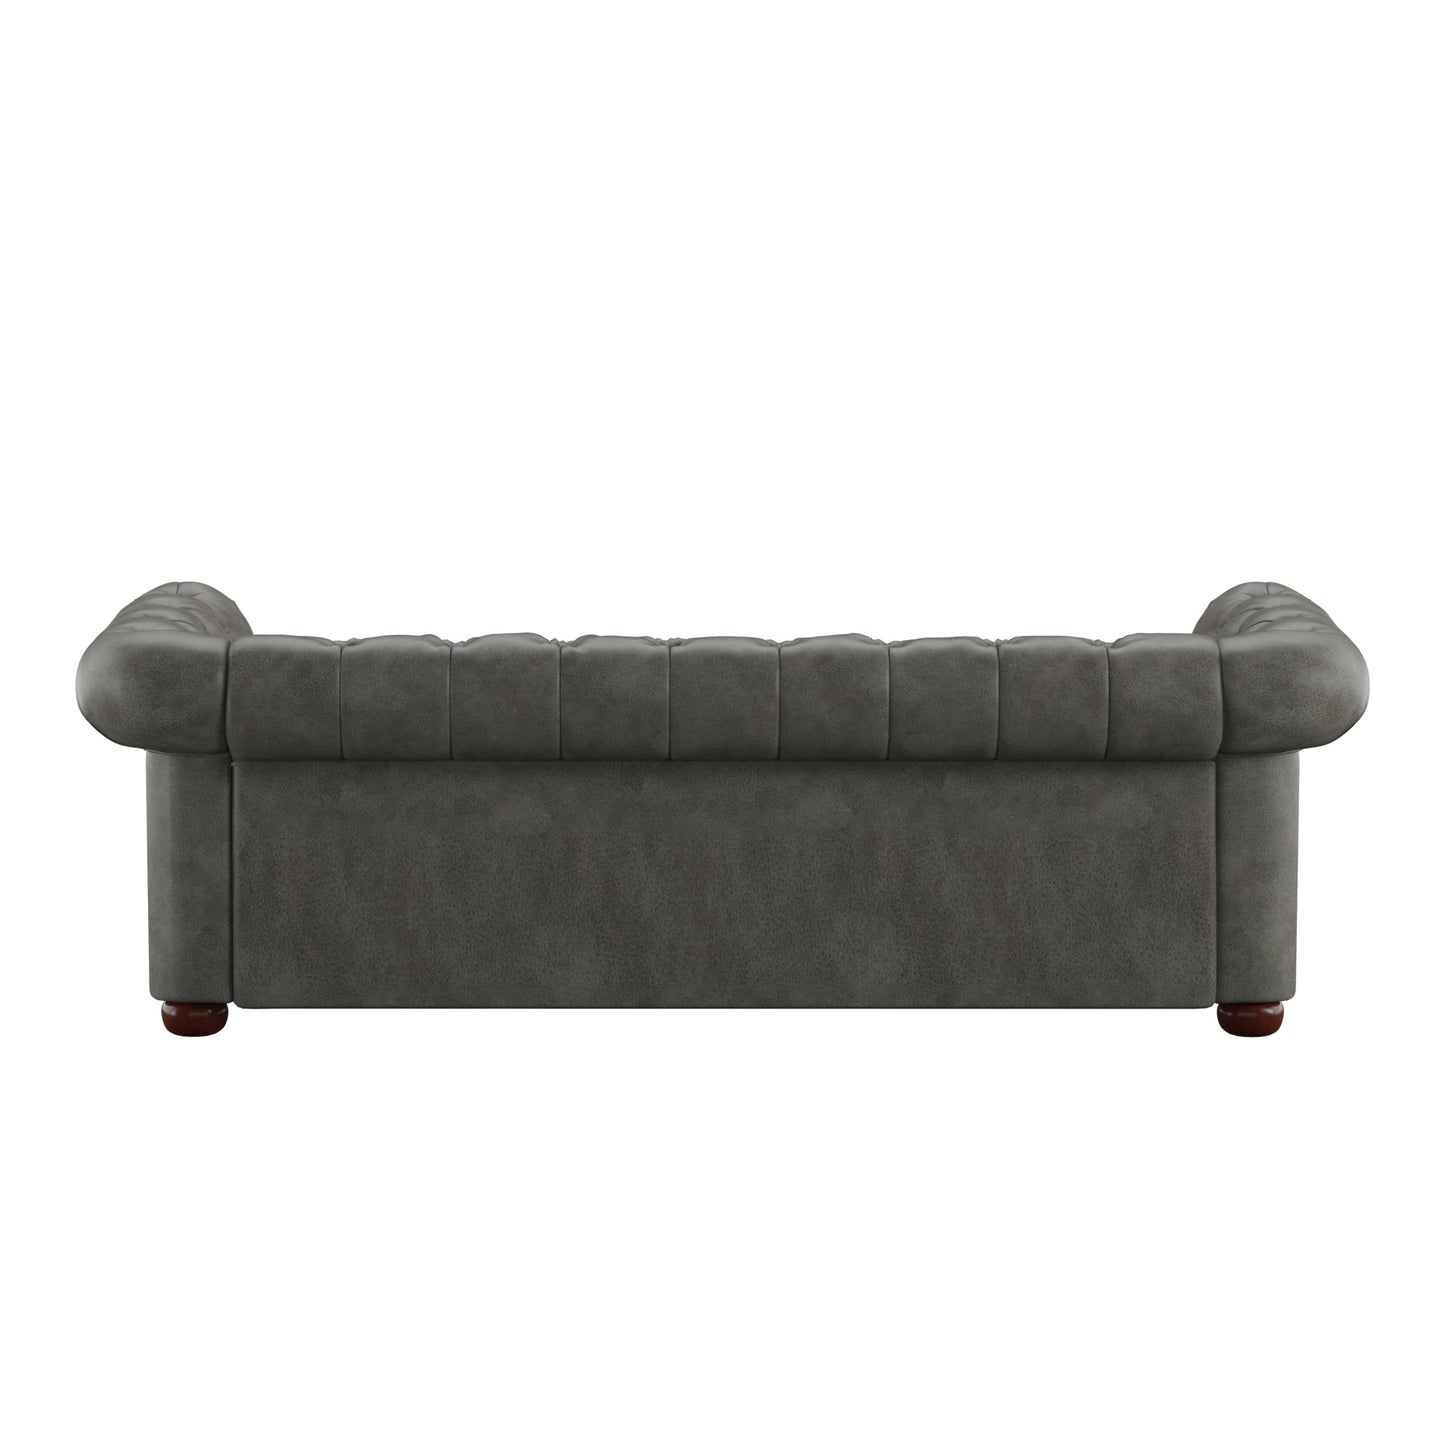 Tufted Scroll Arm Chesterfield Sofa - Grey Microfiber Upholstery